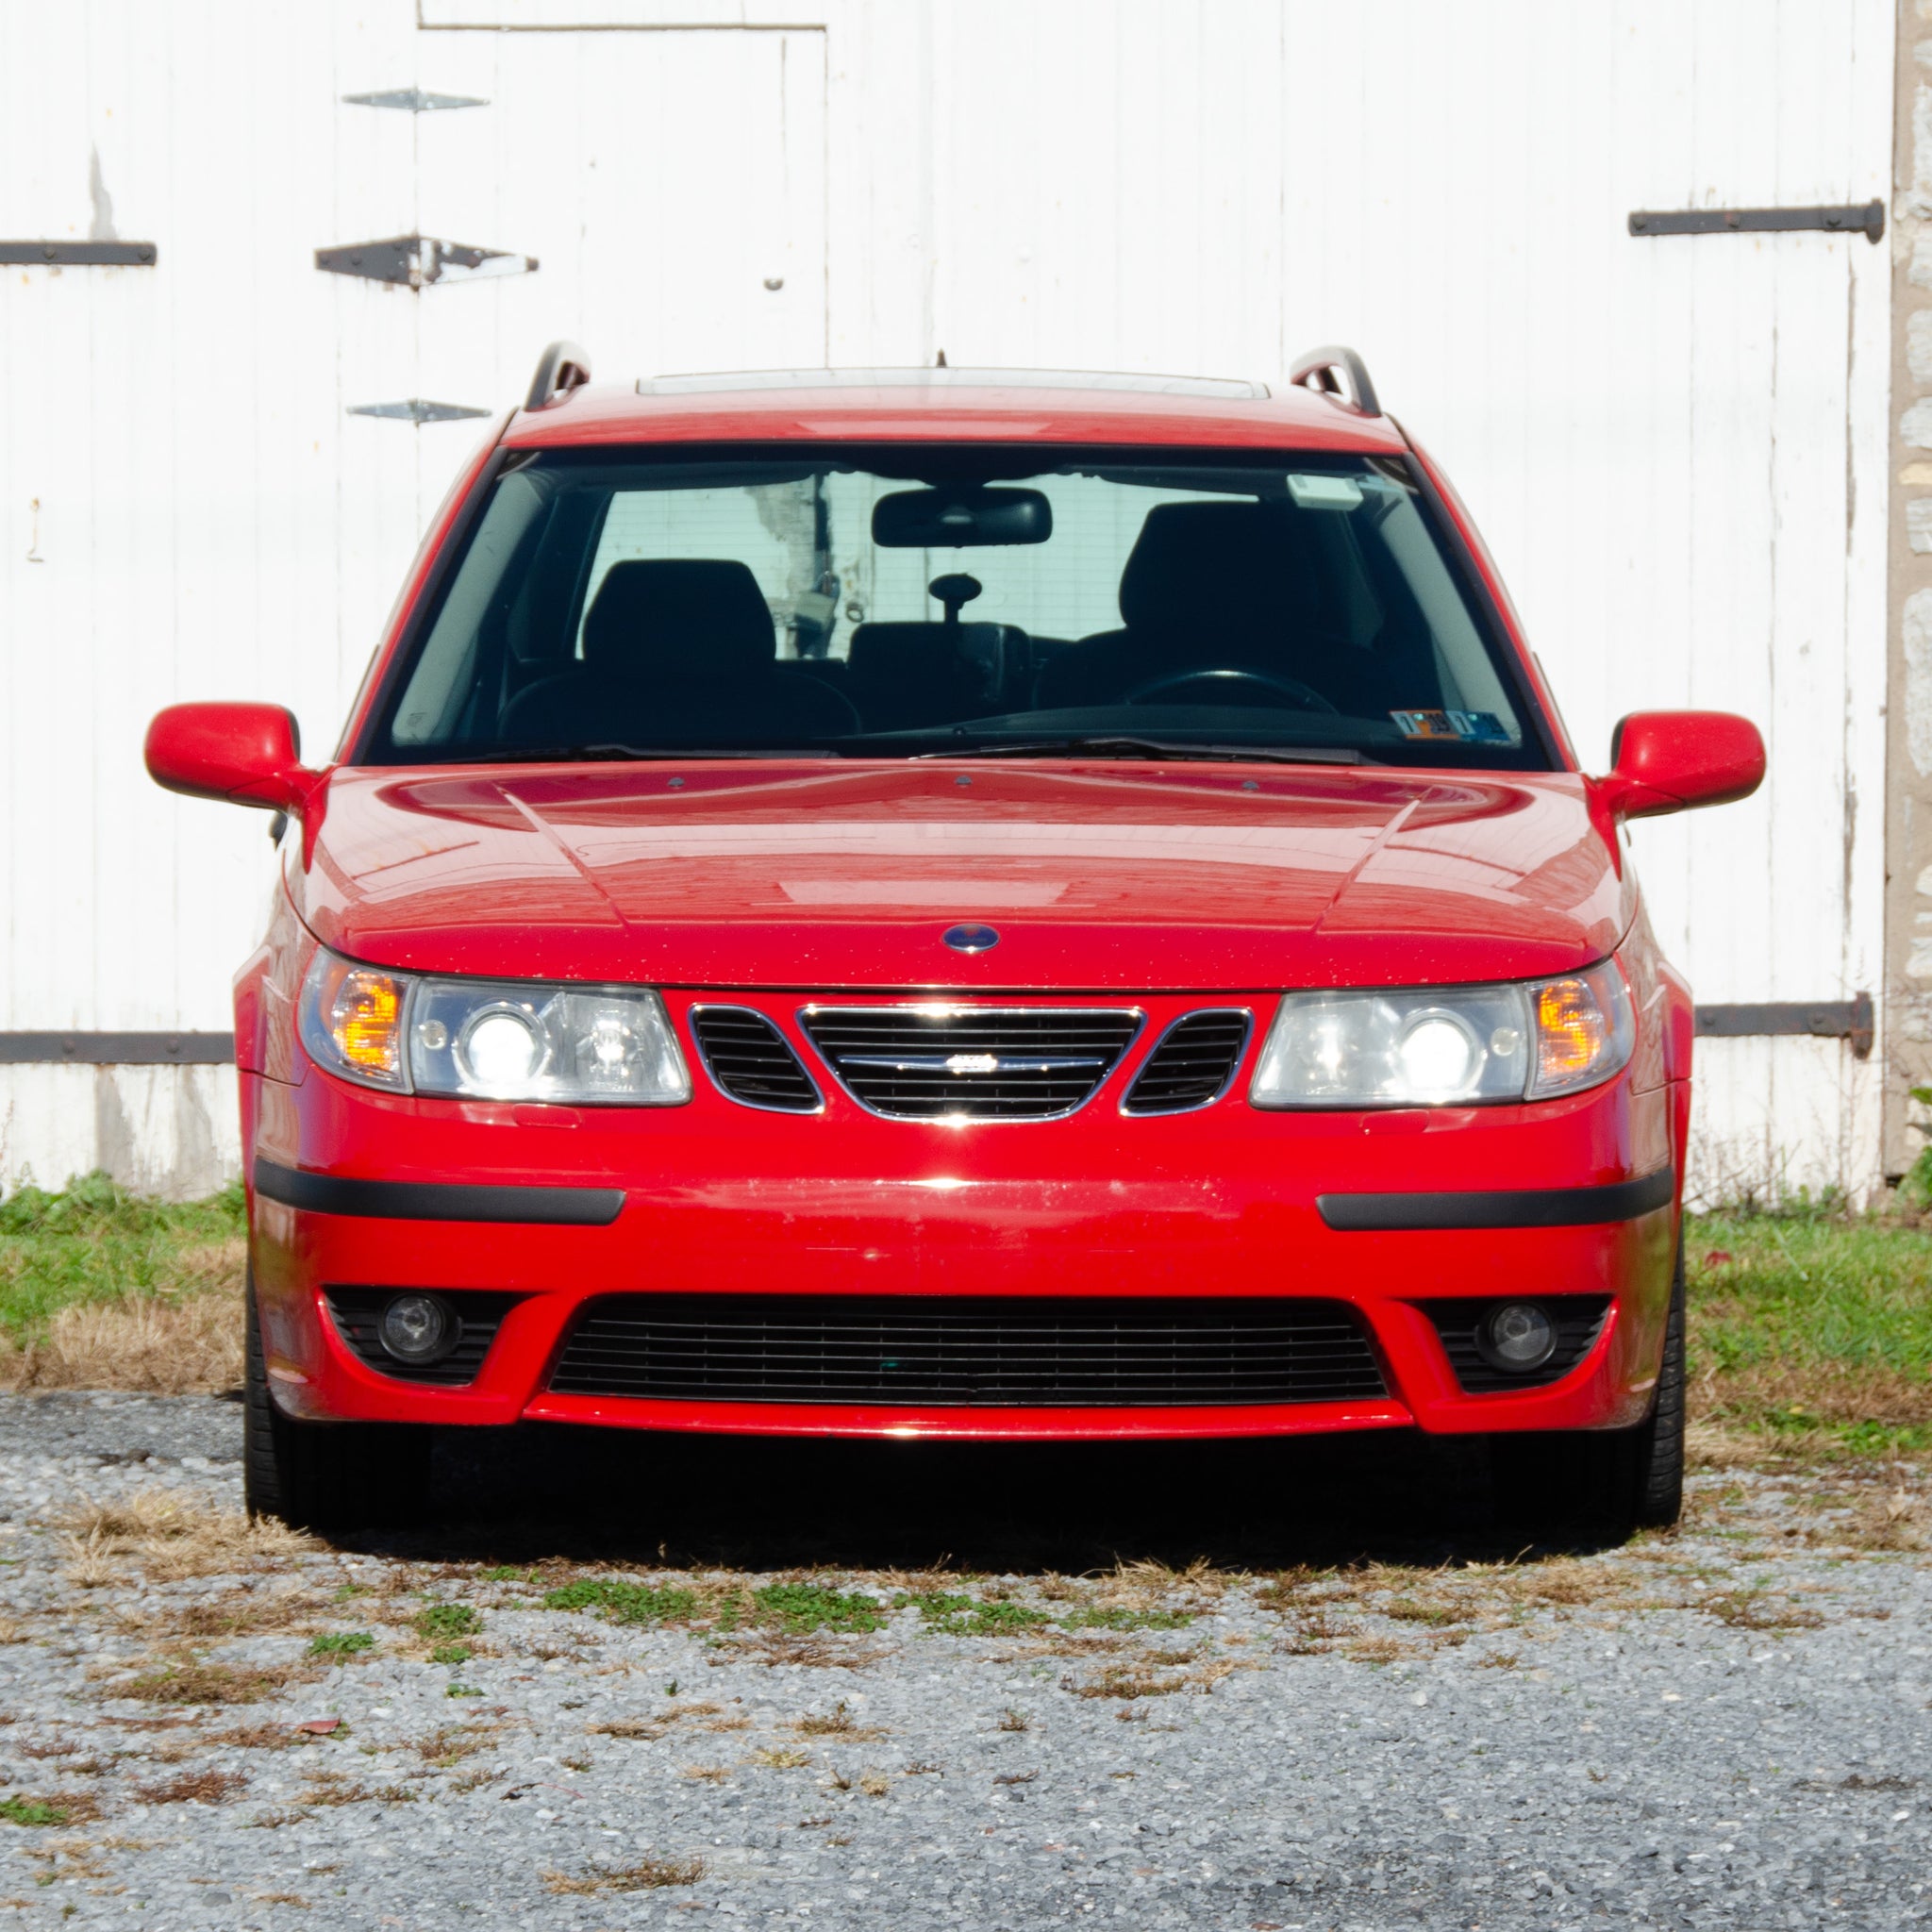 SOLD 2004 Saab 9-5 Hot Aero RARE Estate 5-Speed Manual Laser Red 1 of 11 Produced